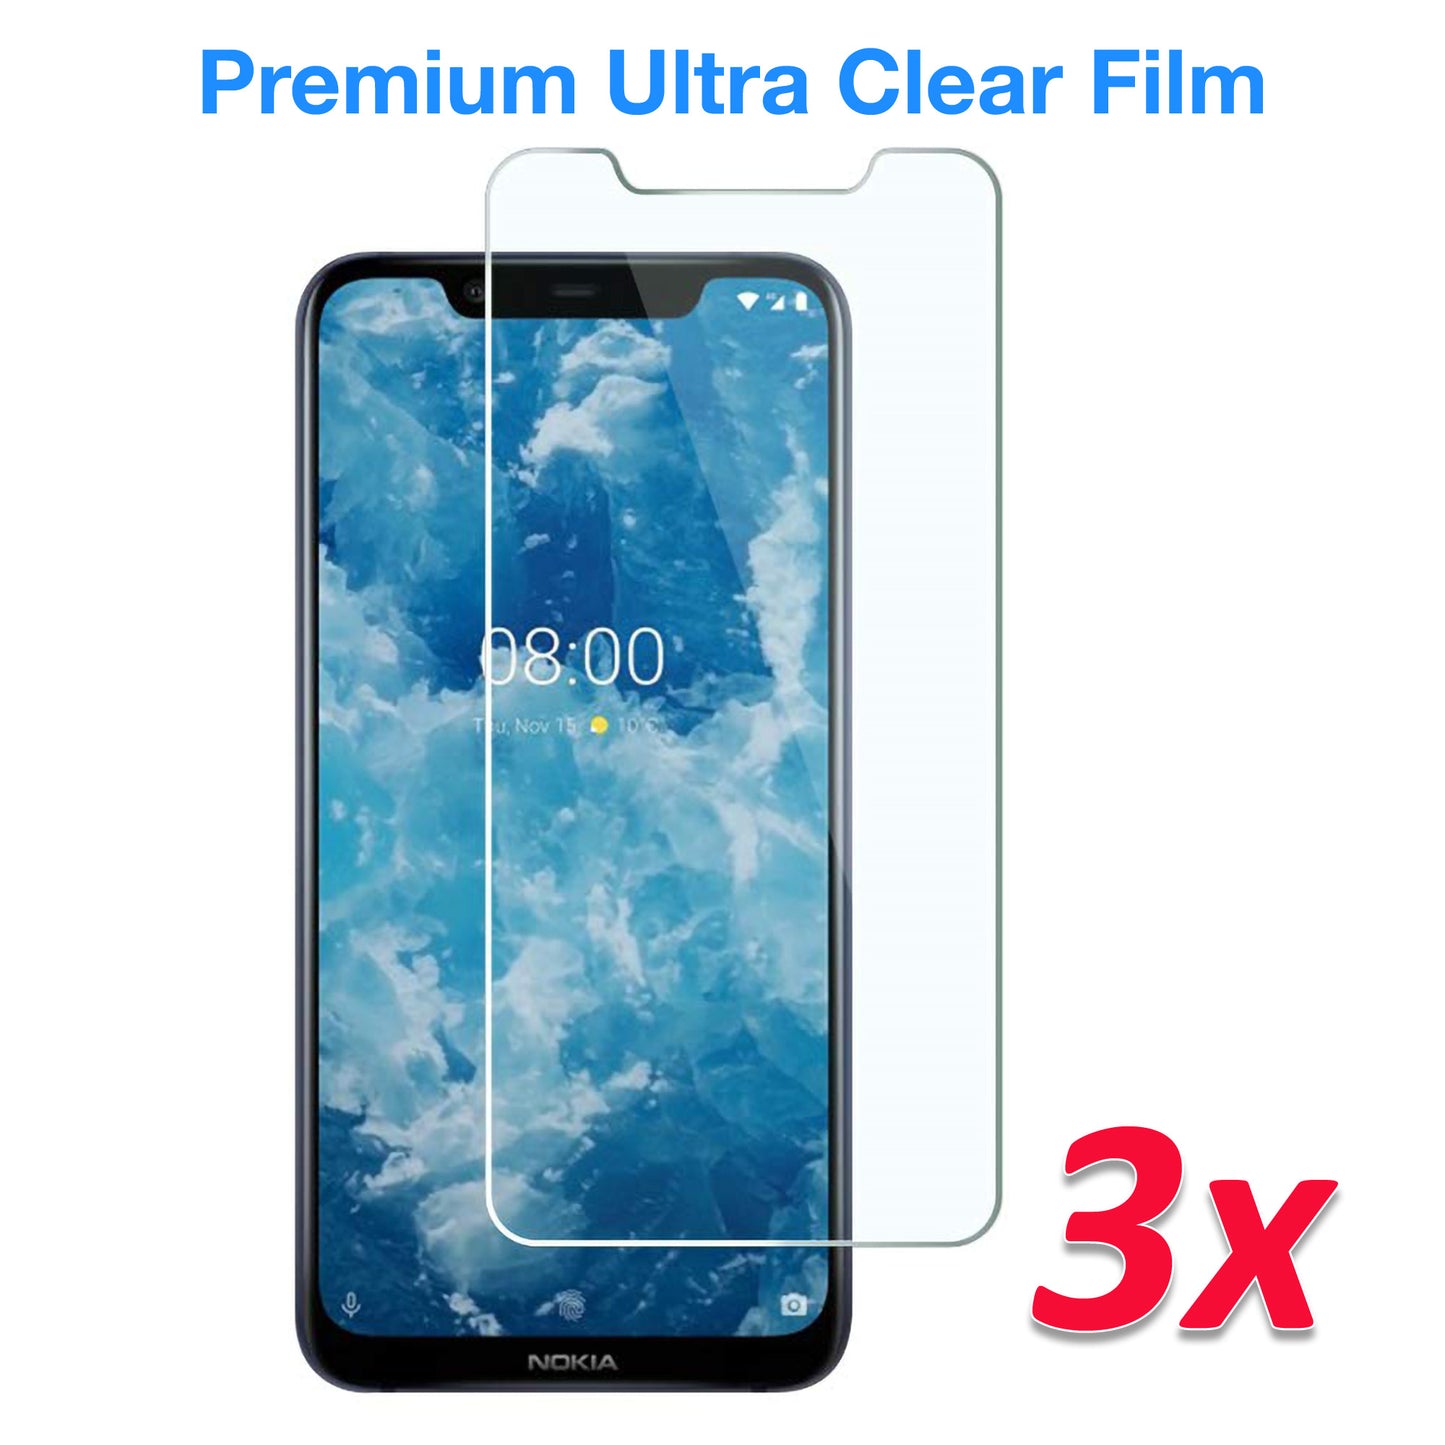 [3 Pack] MEZON Nokia 8.1 Ultra Clear Screen Protector Case Friendly Film (Nokia 8.1, Clear)